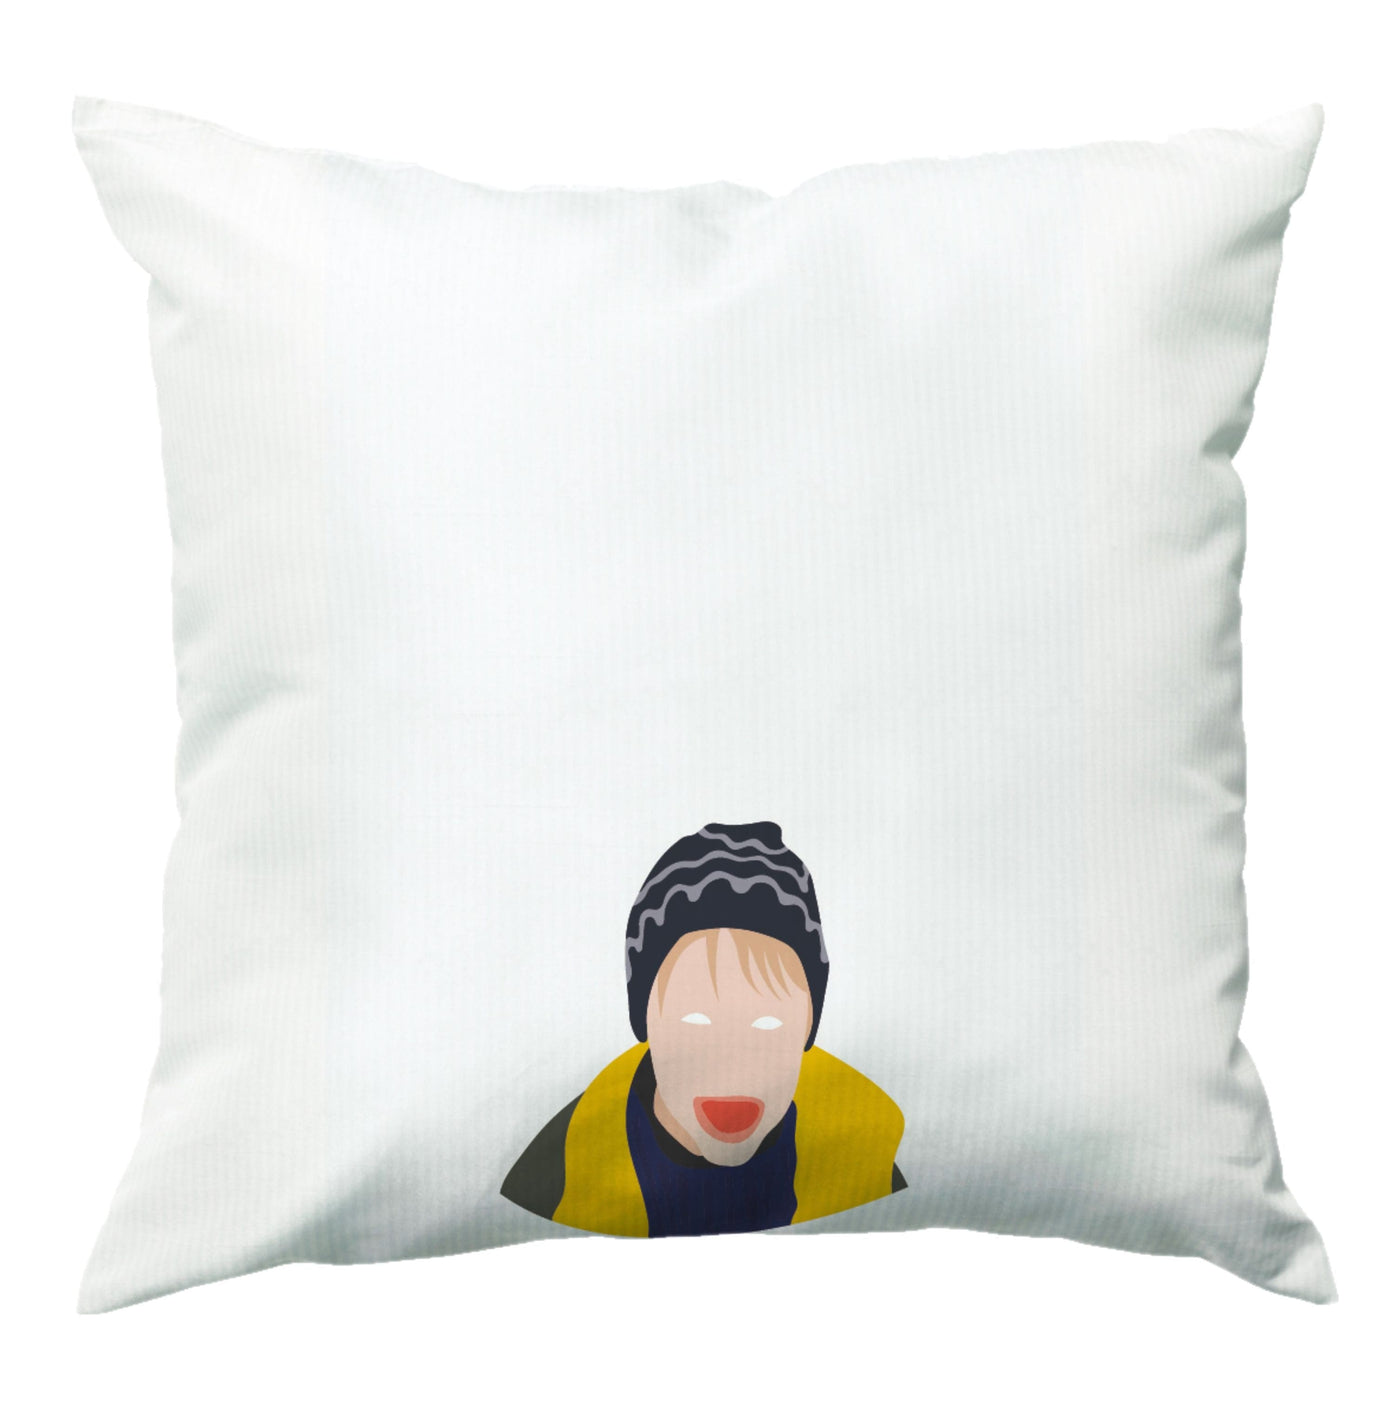 Tongue Out - Home Alone Cushion